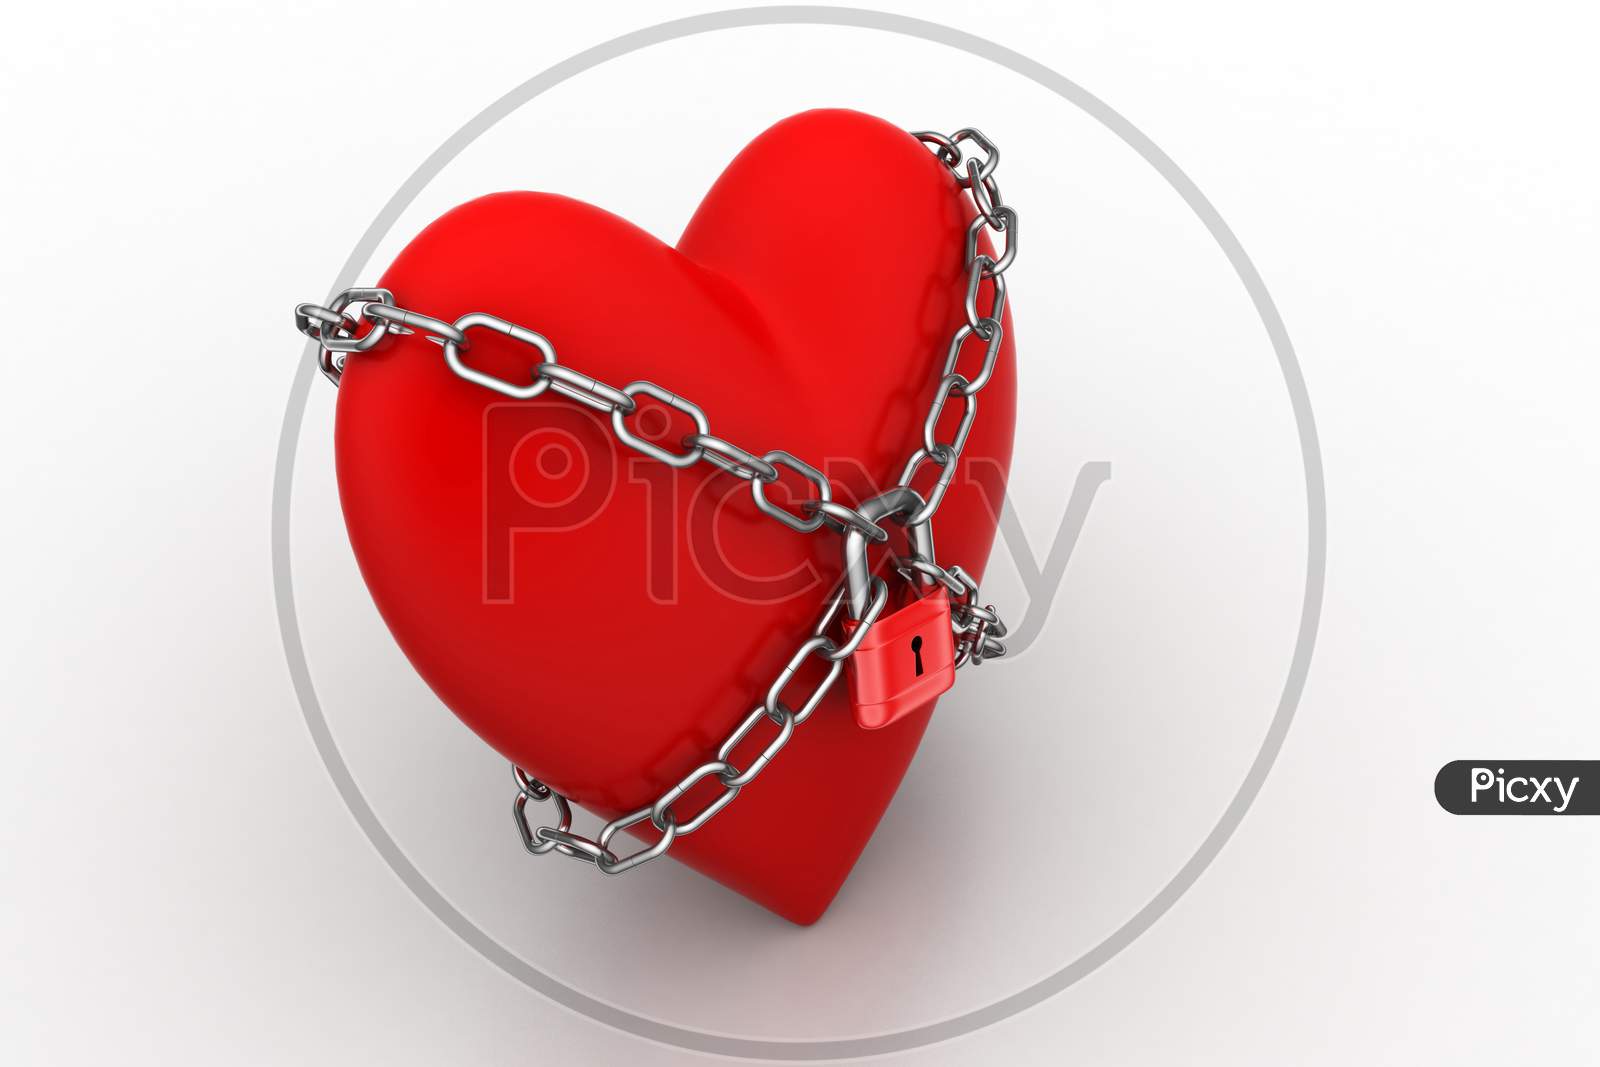 Red Heart Locked With Chain. Love Concept.